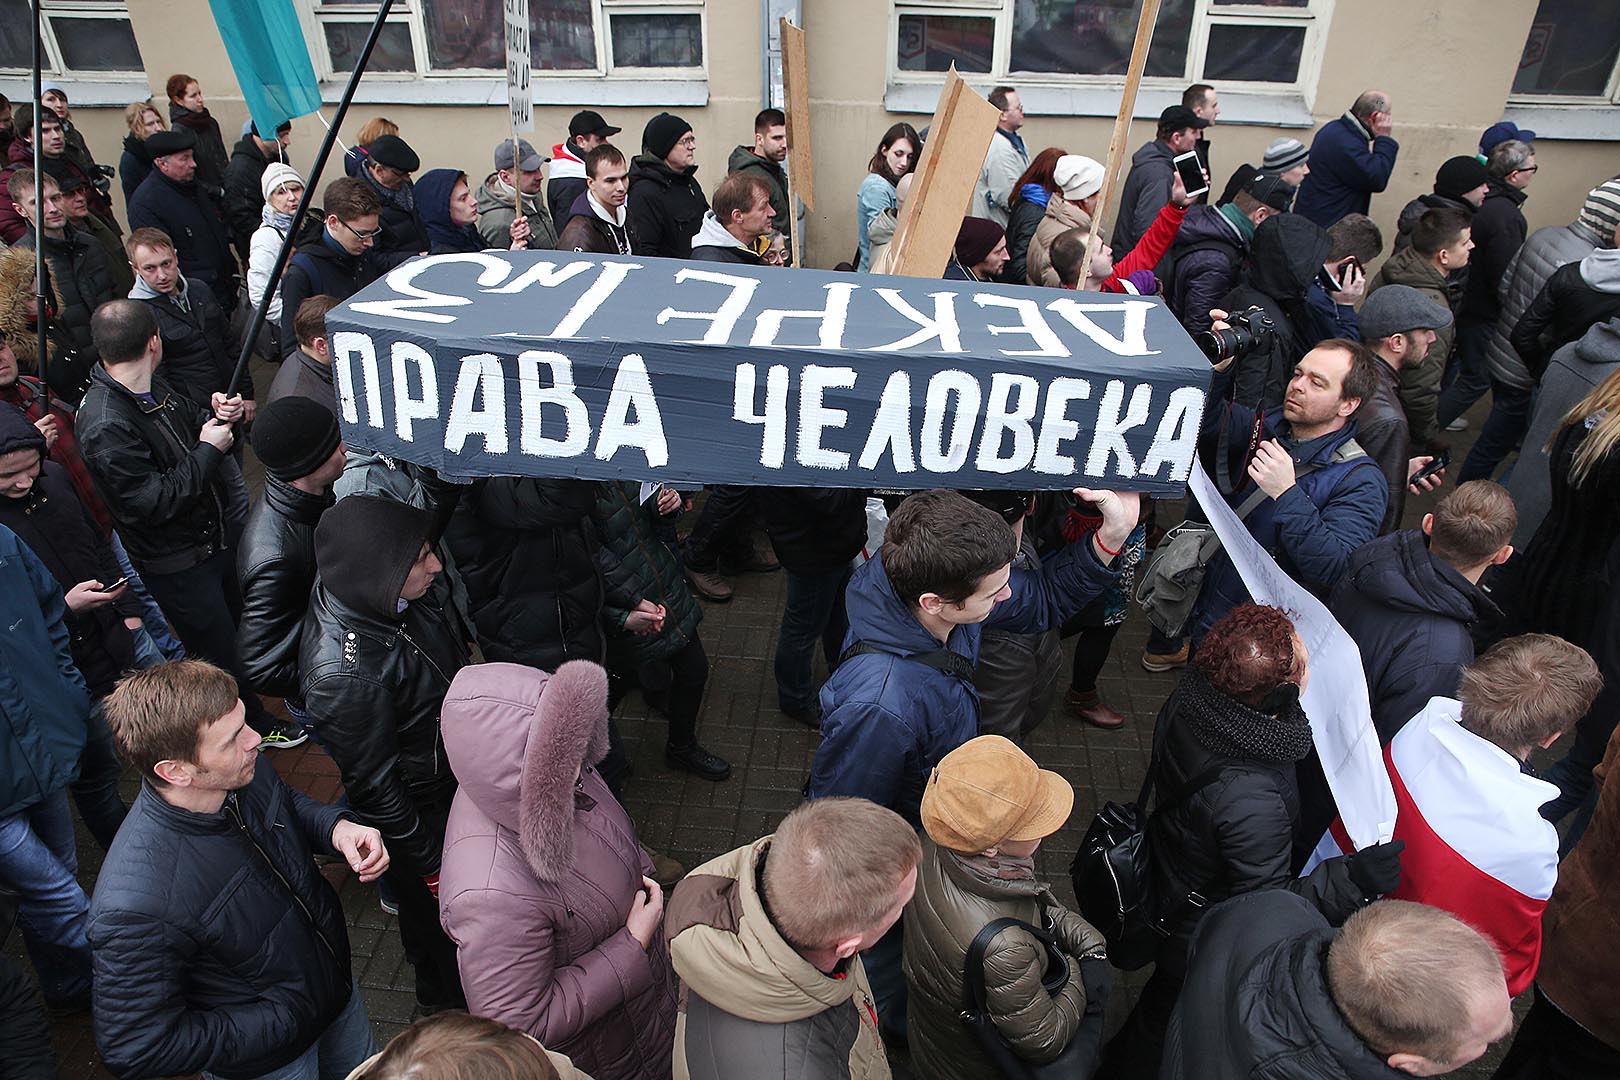 Belarusian authorities gradually step up penalties for street protest participants